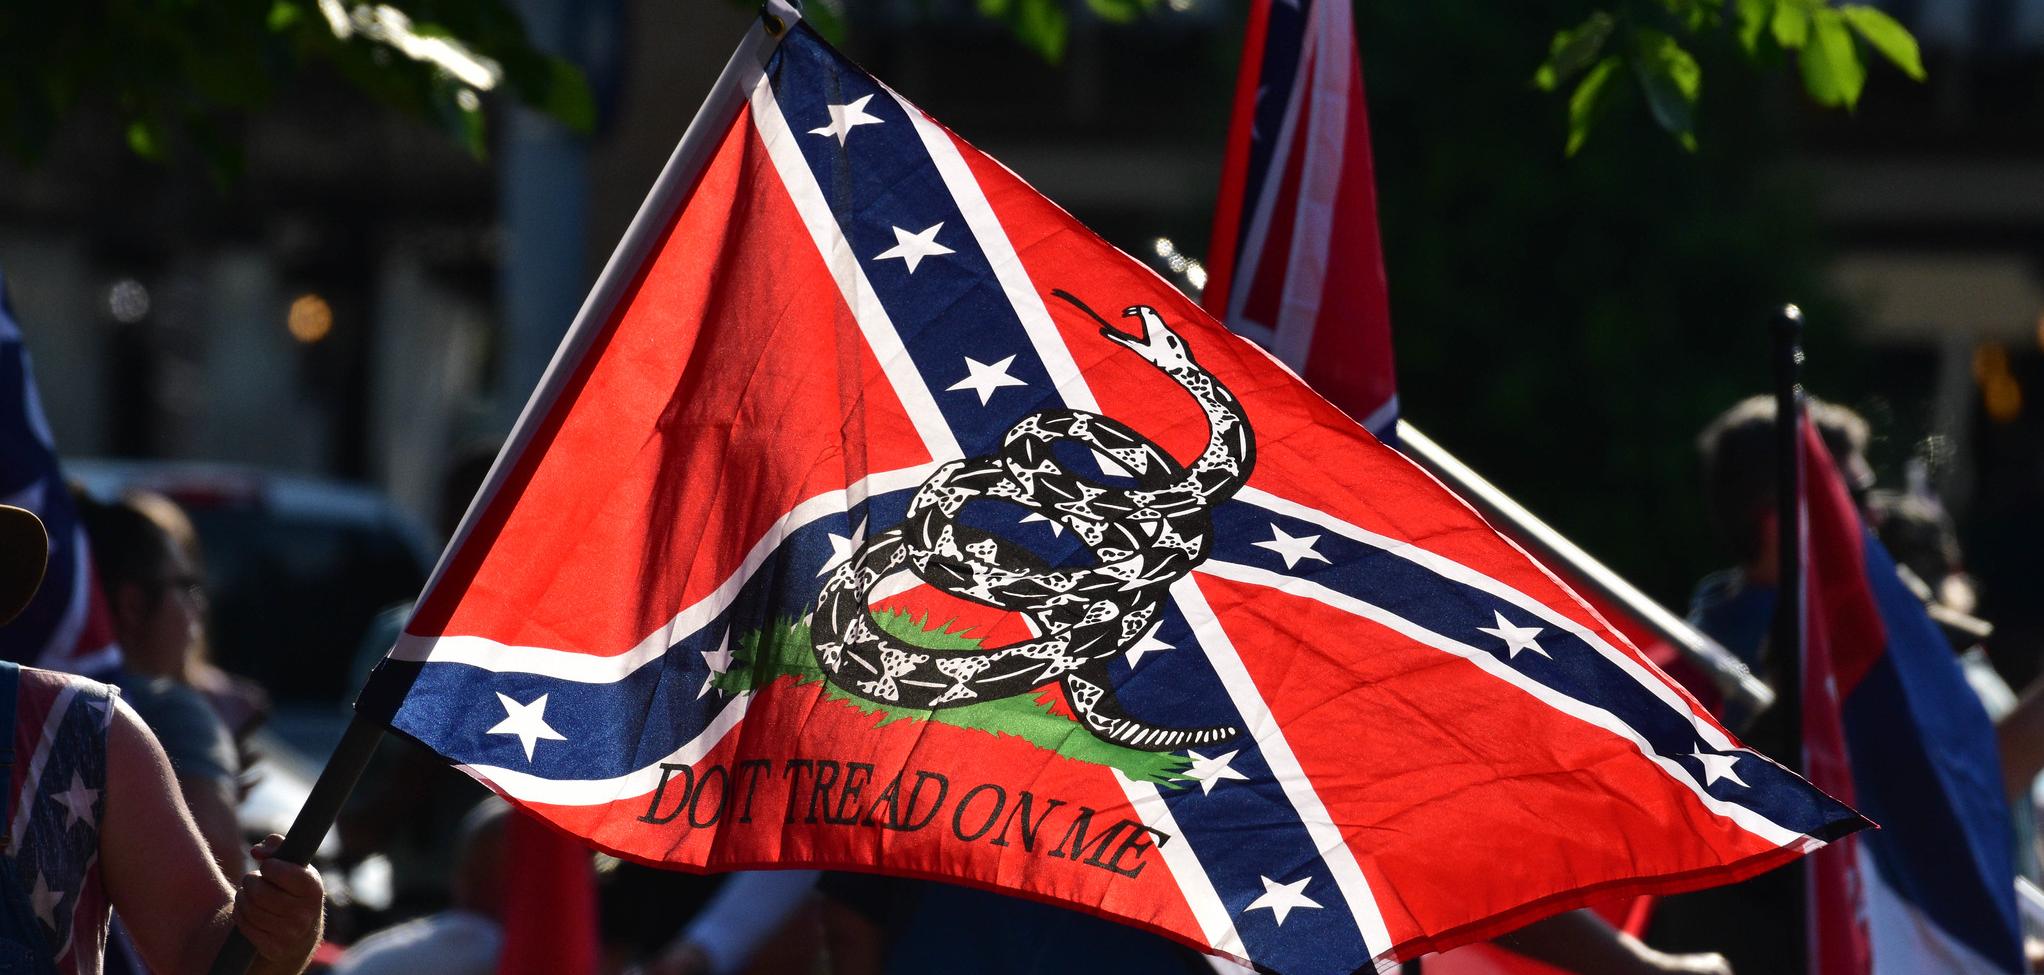 A confederate flag with a "don't tread on me" symbol on it.